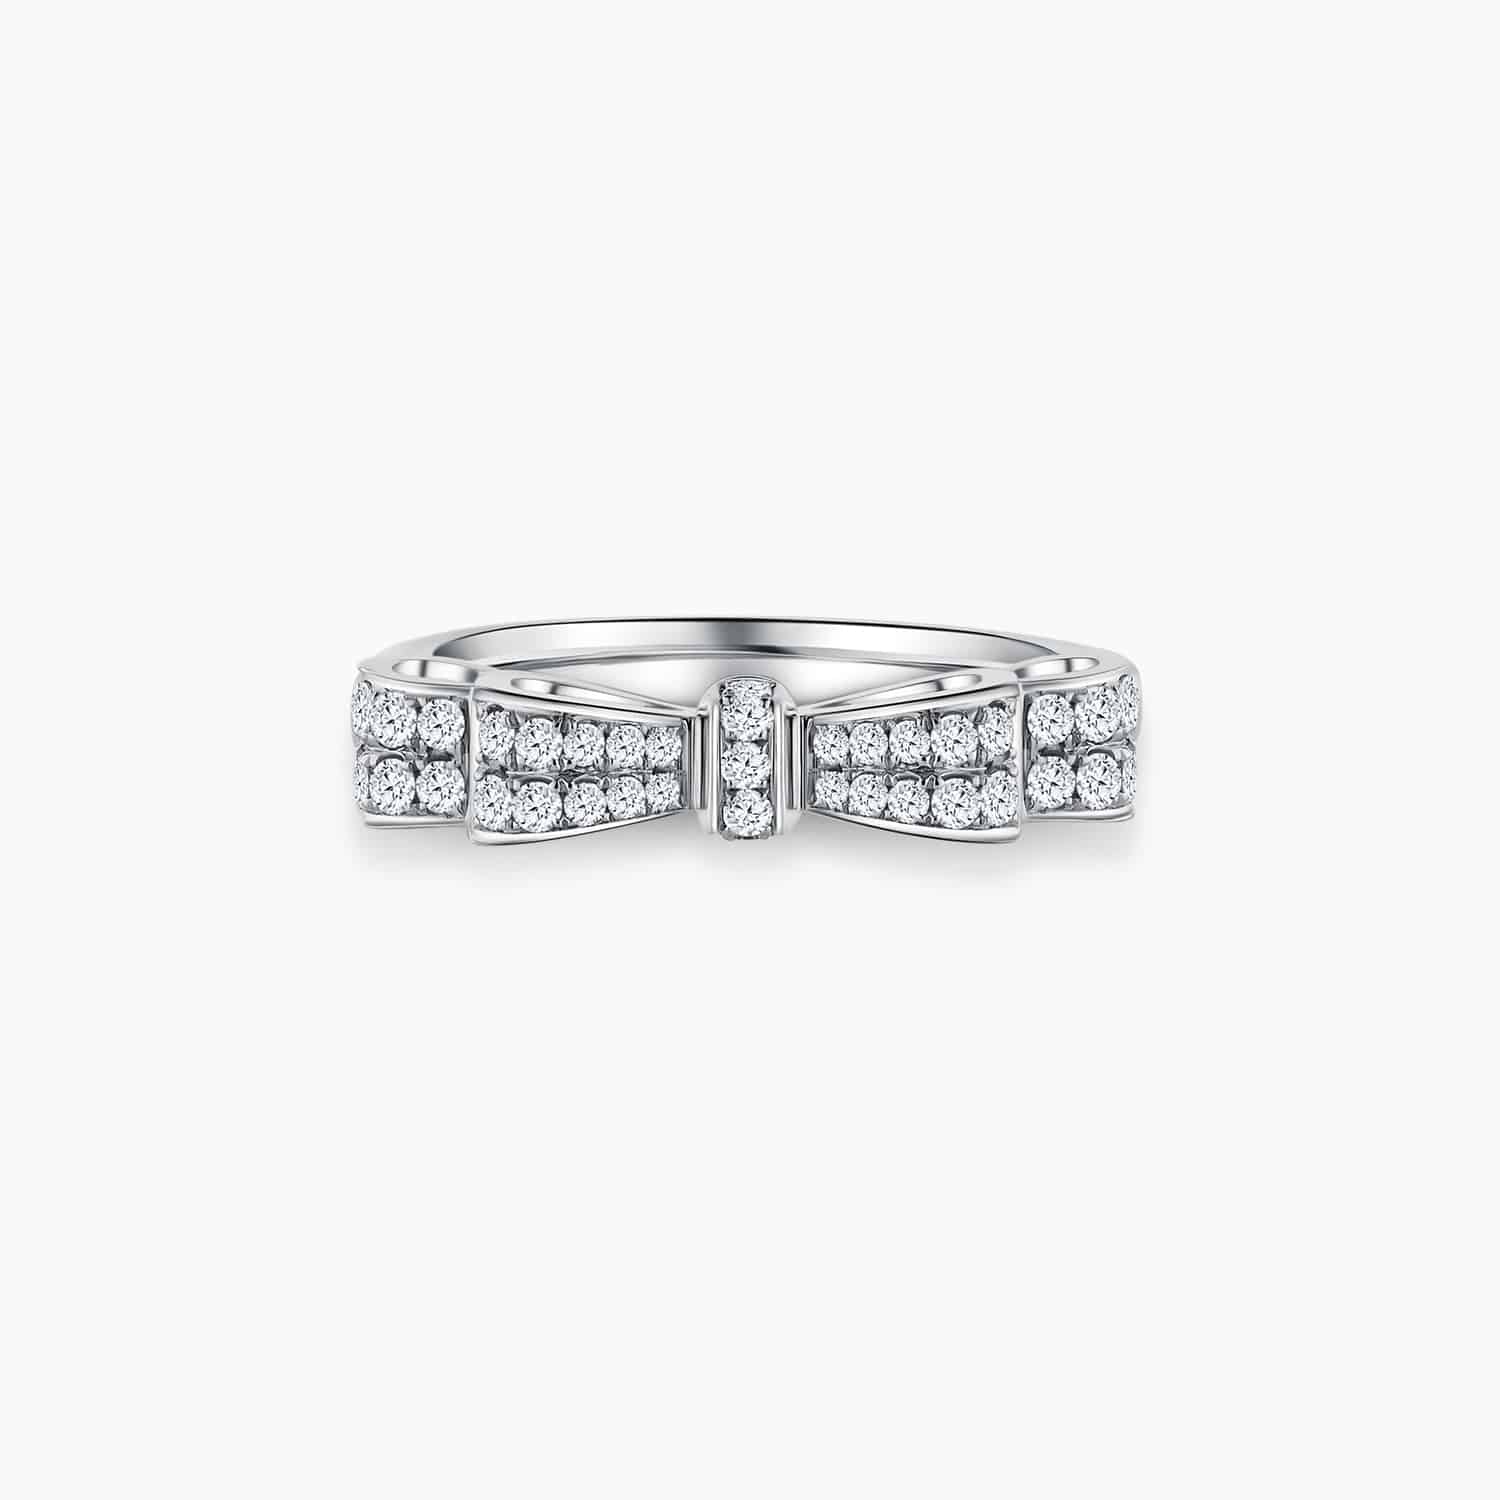 LVC NOEUD BOW white gold engagement wedding ring with ribbon design in 18k white gold and 37 diamonds